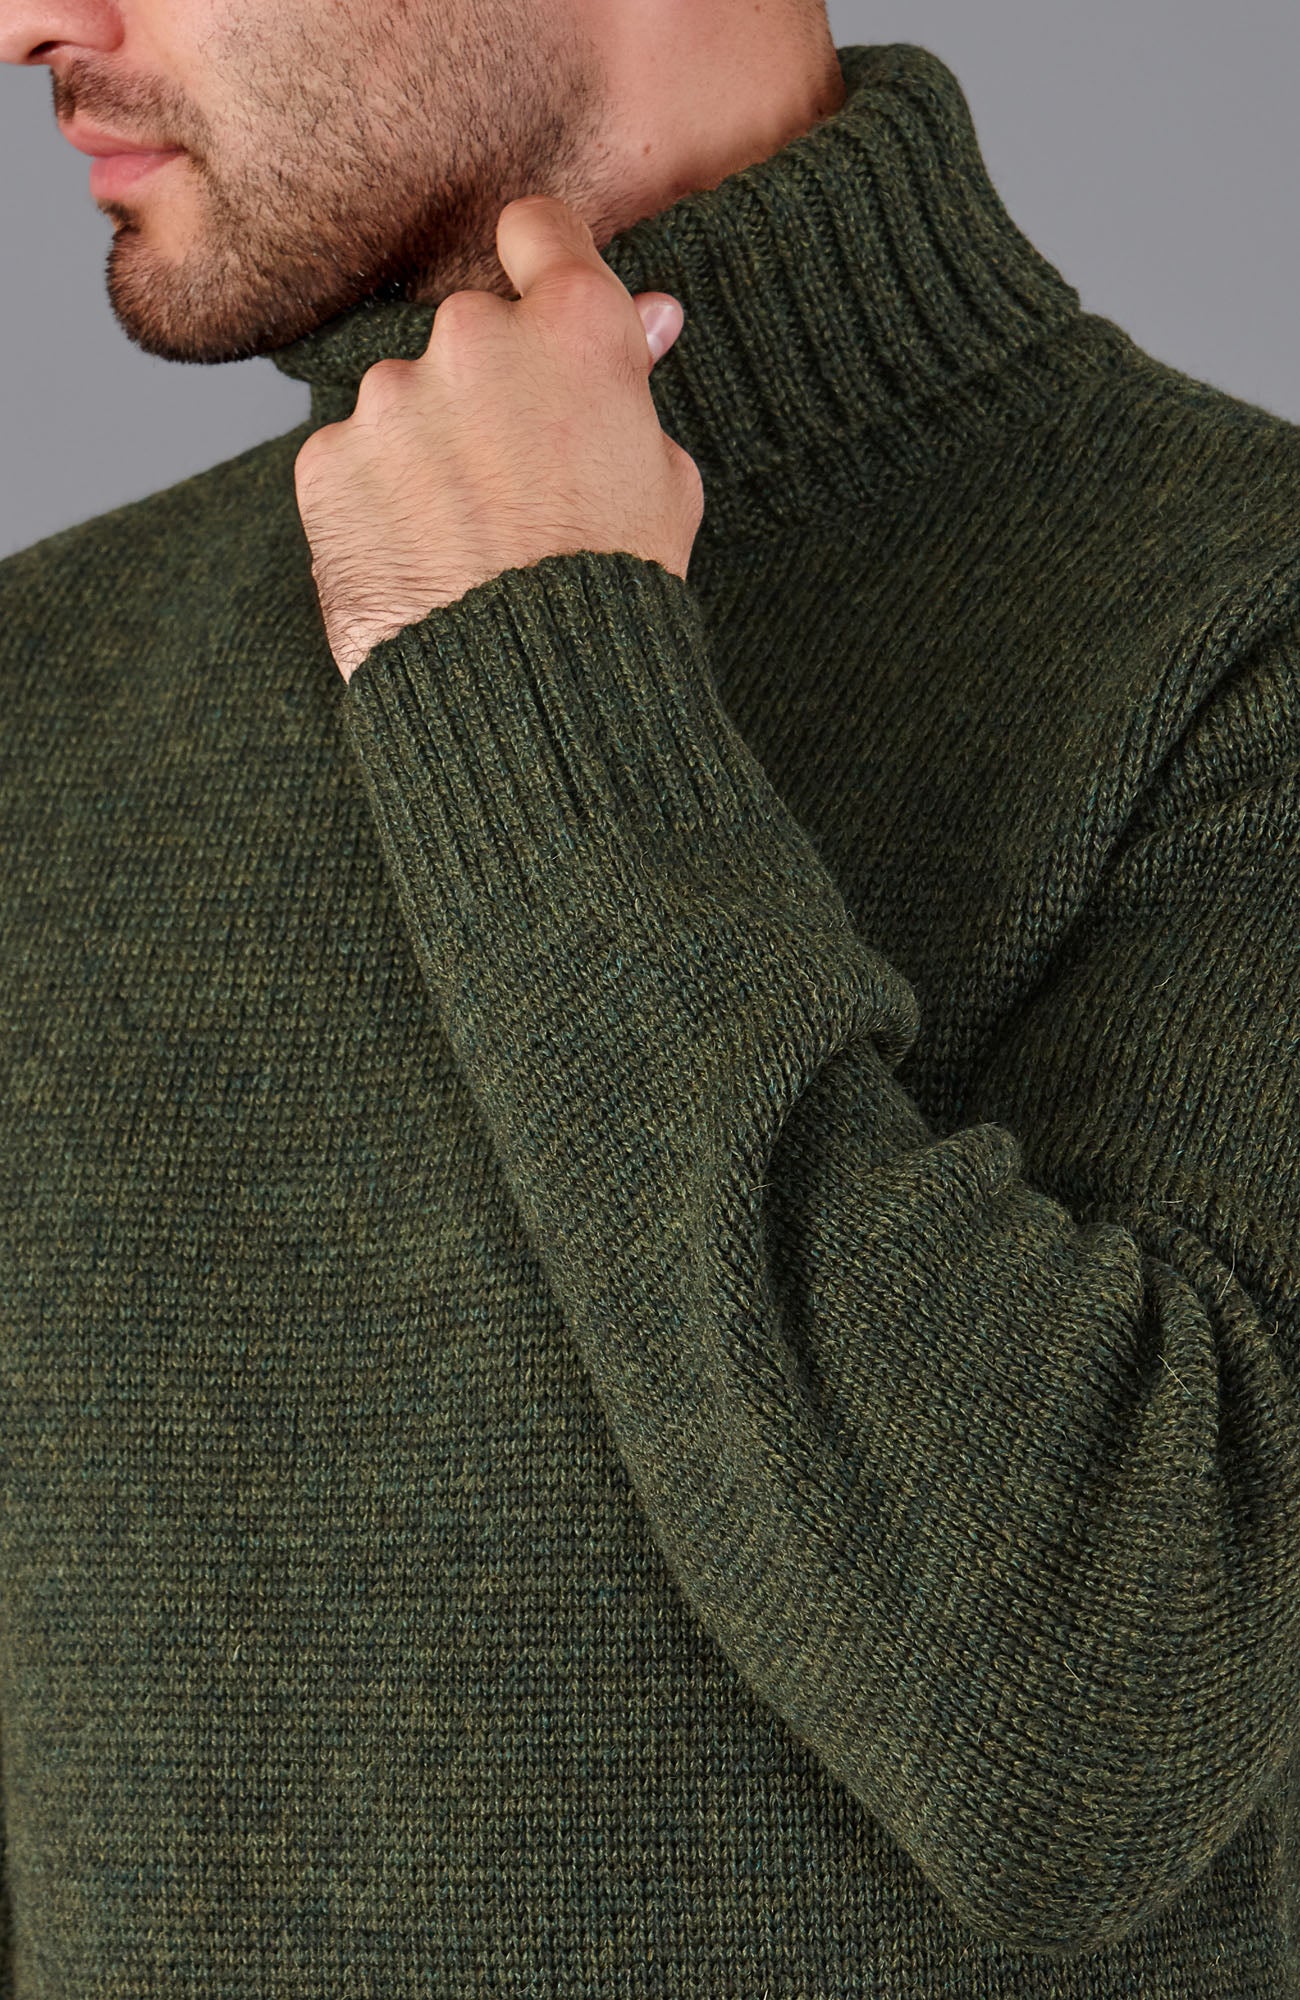 GREY TURTLENECK  Turtleneck outfit men, Mens casual outfits, Mens outfits